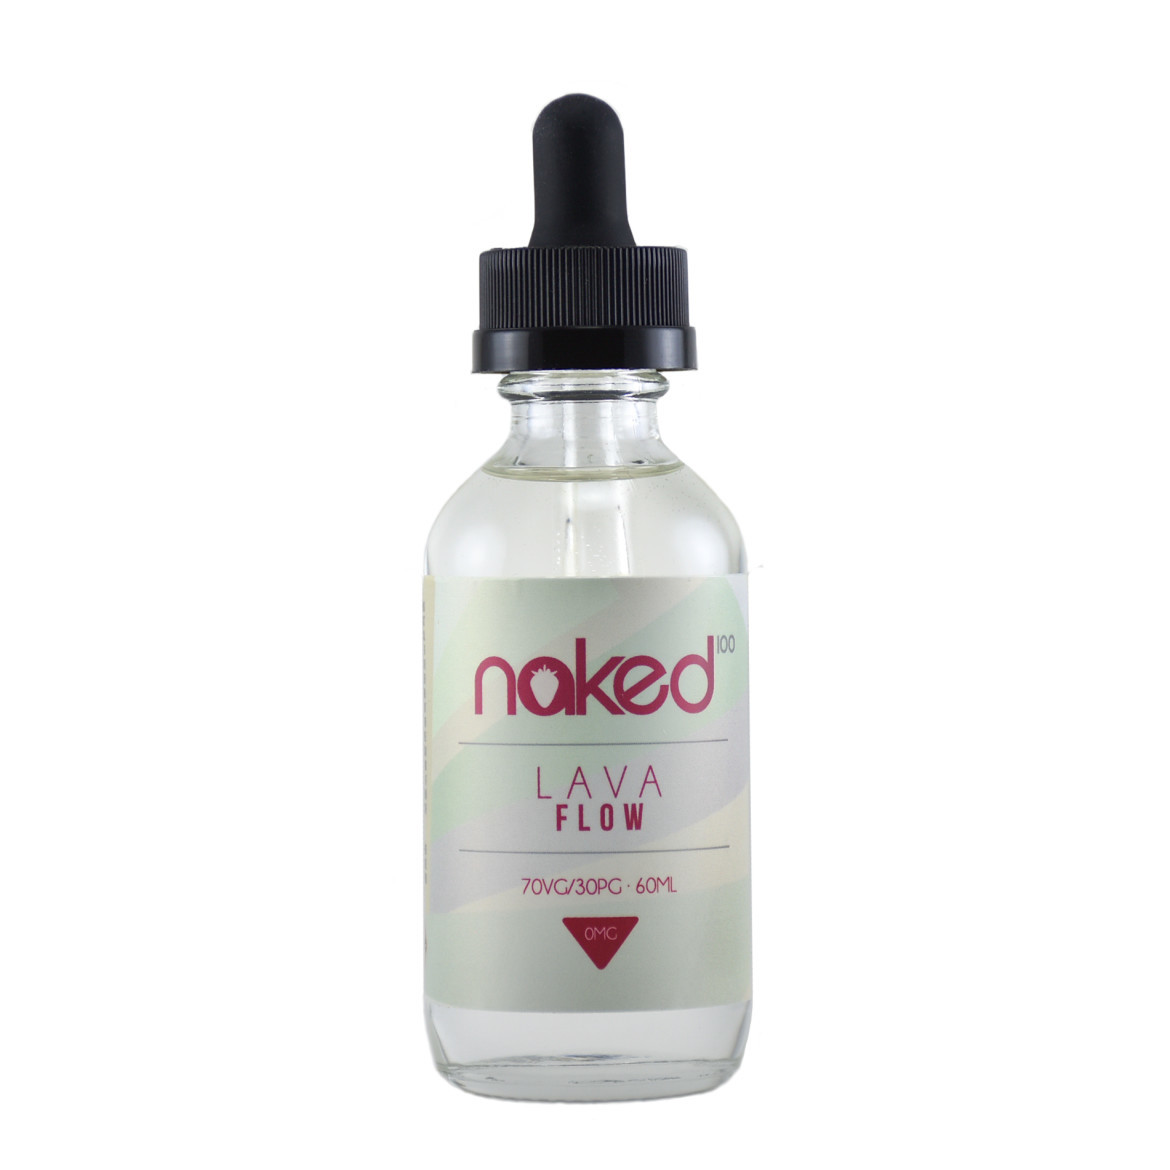 NAKED 100 LAVA FLOW 60ml Ejuice 3mg.